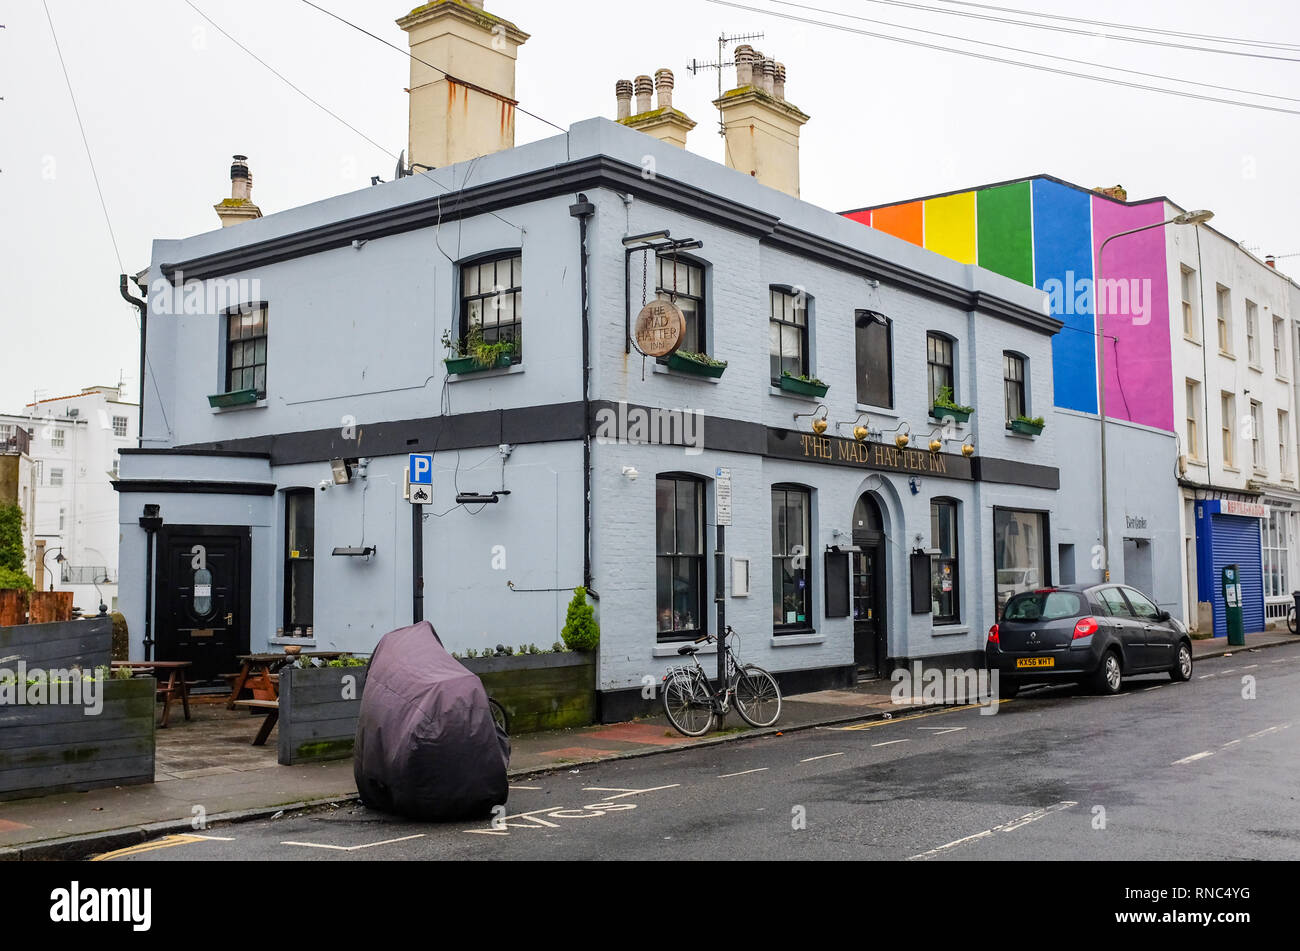 The quirky Mad Hatter pub in Kemp Town Brighton UK Stock Photo